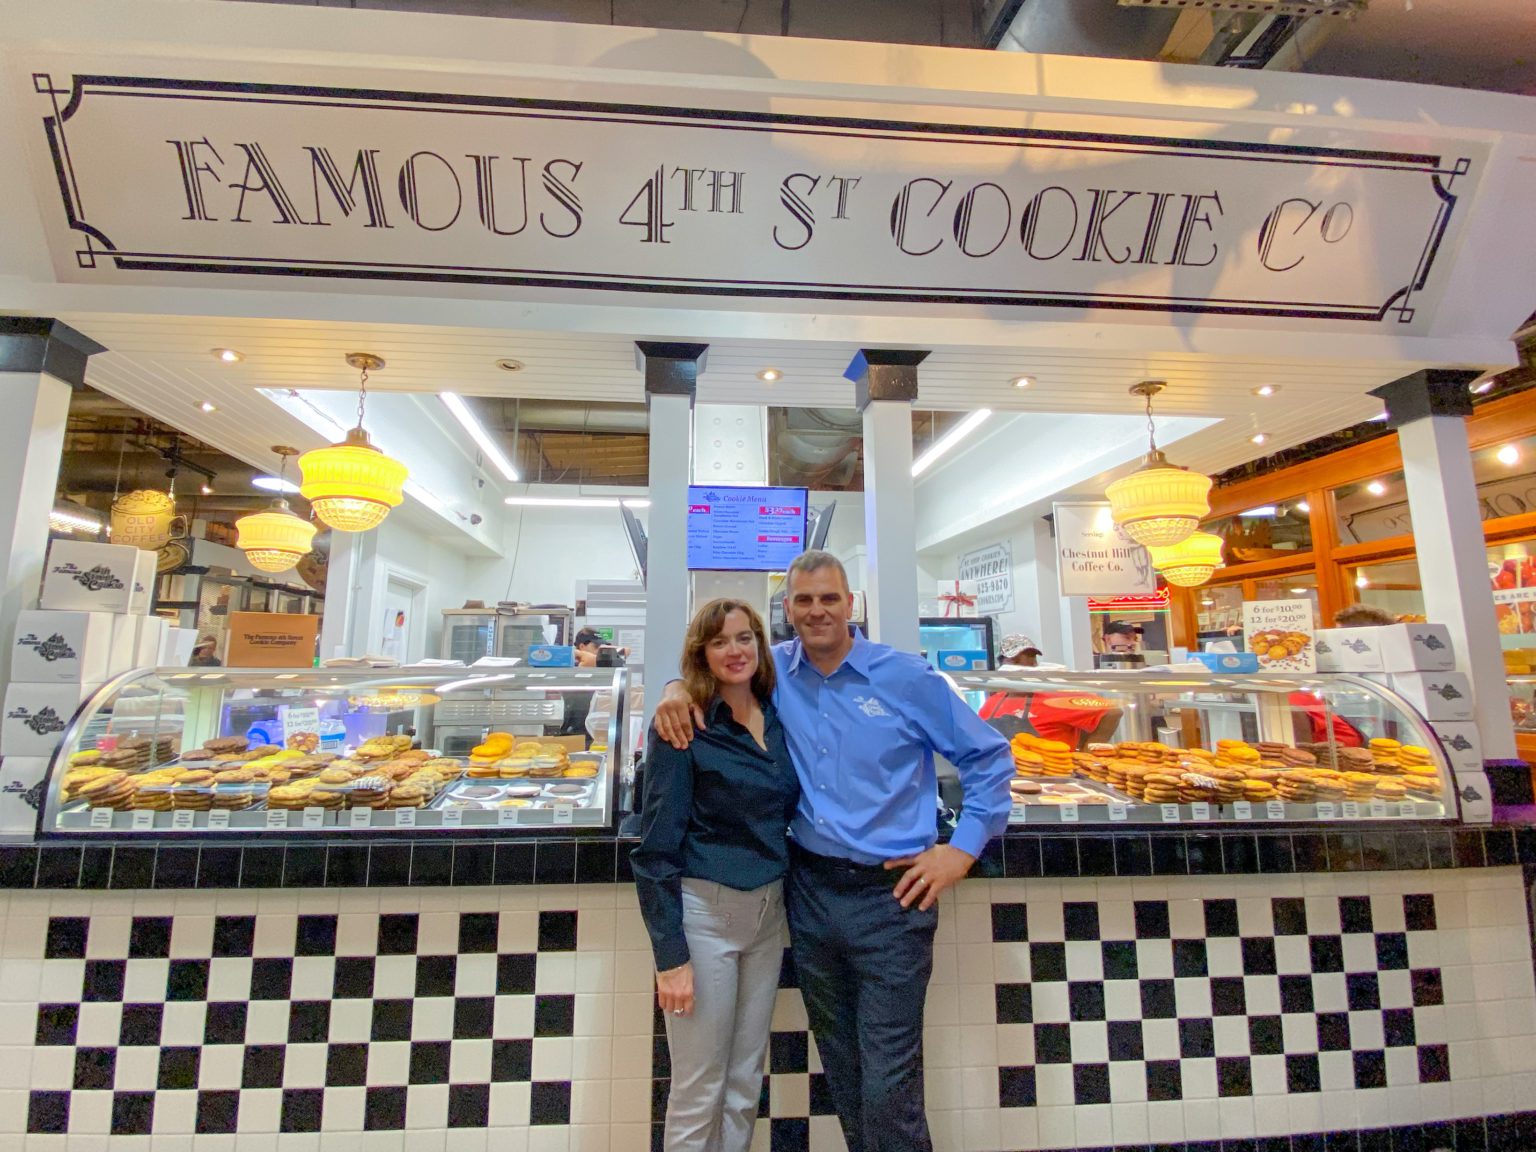 Photo of Brian and Tina Phillips in front of the Famous 4th St. Cookie booth at Reading Terminal Market